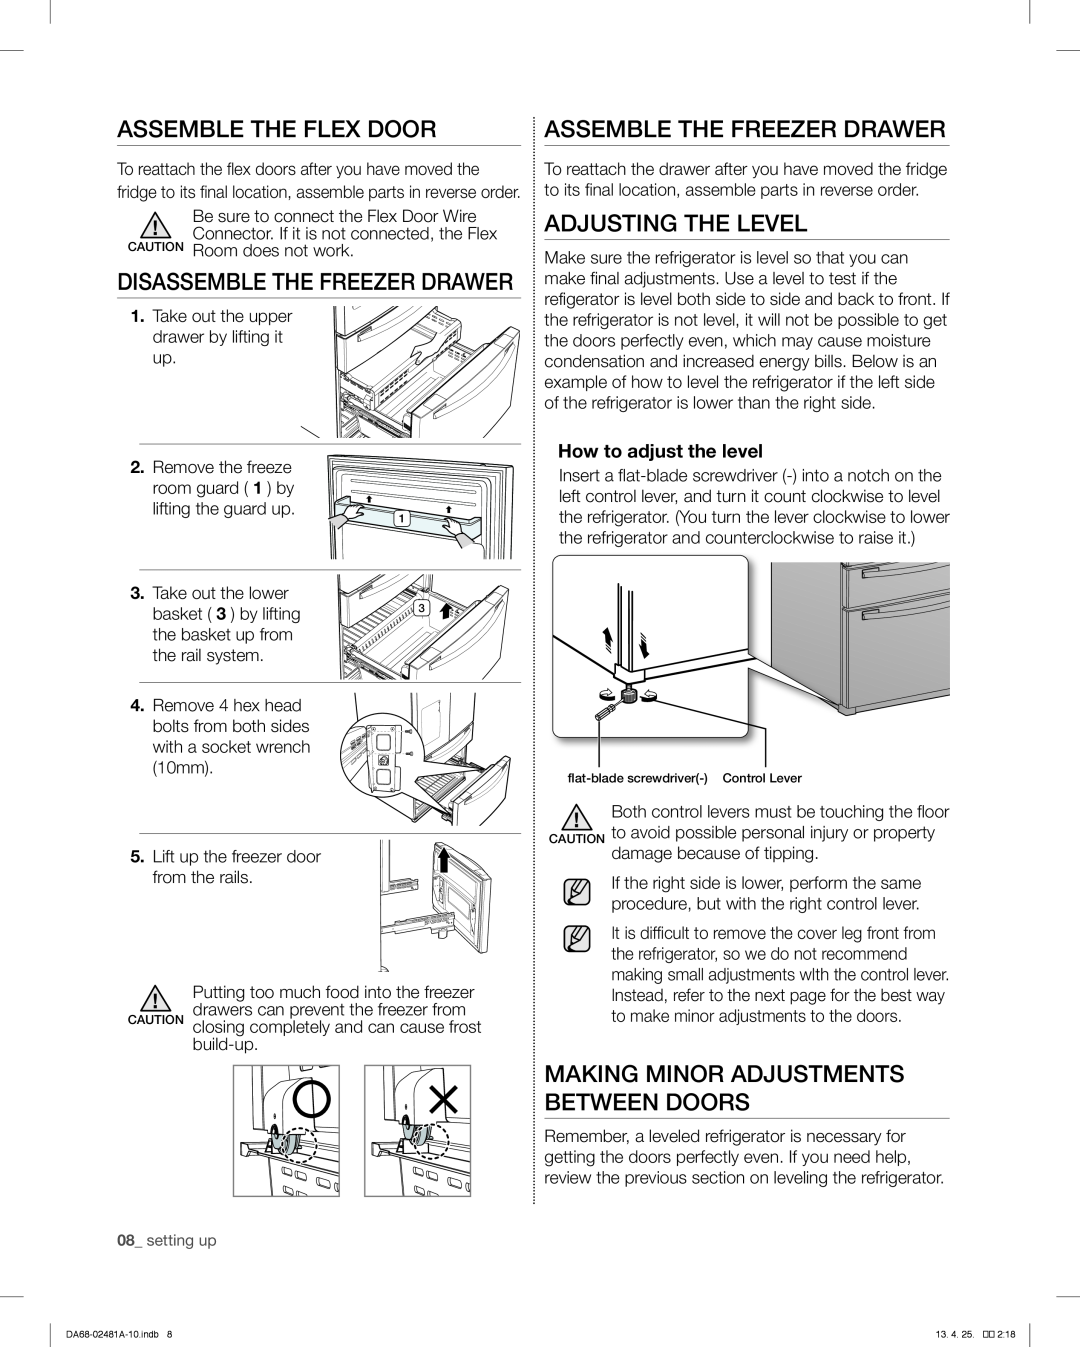 Samsung RF4267HAWP Assemble The Flex Door, Assemble The Freezer Drawer, Adjusting The Level, How to adjust the level 